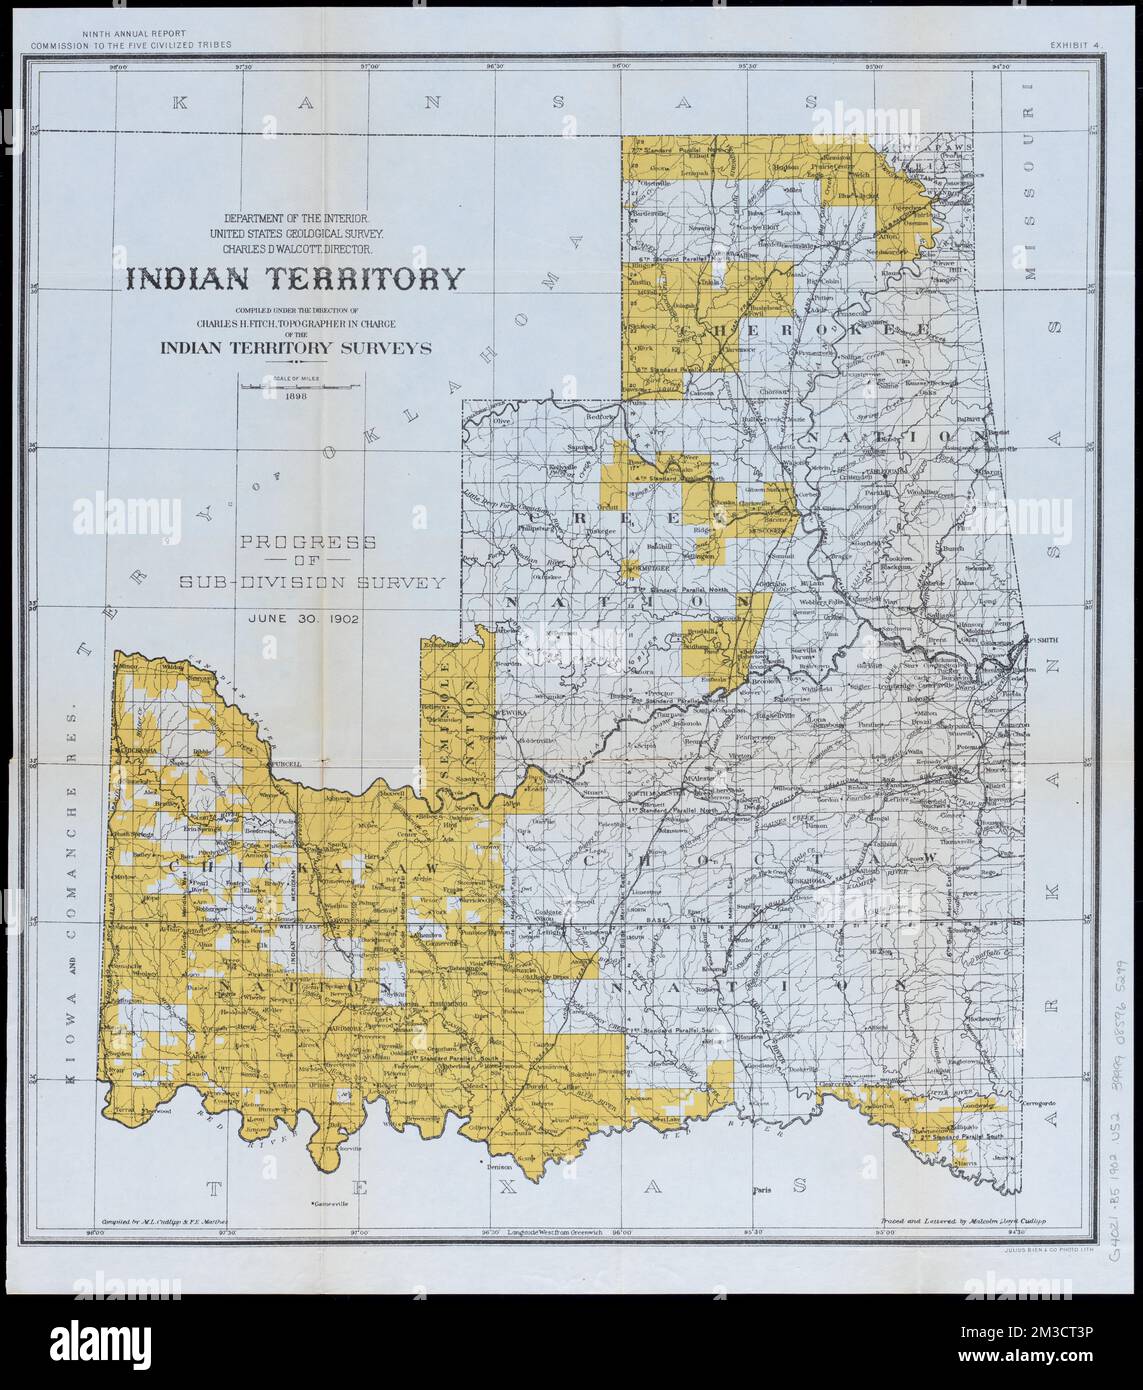 Indian Territory : progress of sub-division survey, June 30, 1902 , Indian Territory, Maps, Indian Territory, Surveys, Maps, Oklahoma, Maps, Indian reservations, Oklahoma, Maps Norman B. Leventhal Map Center Collection Stock Photo